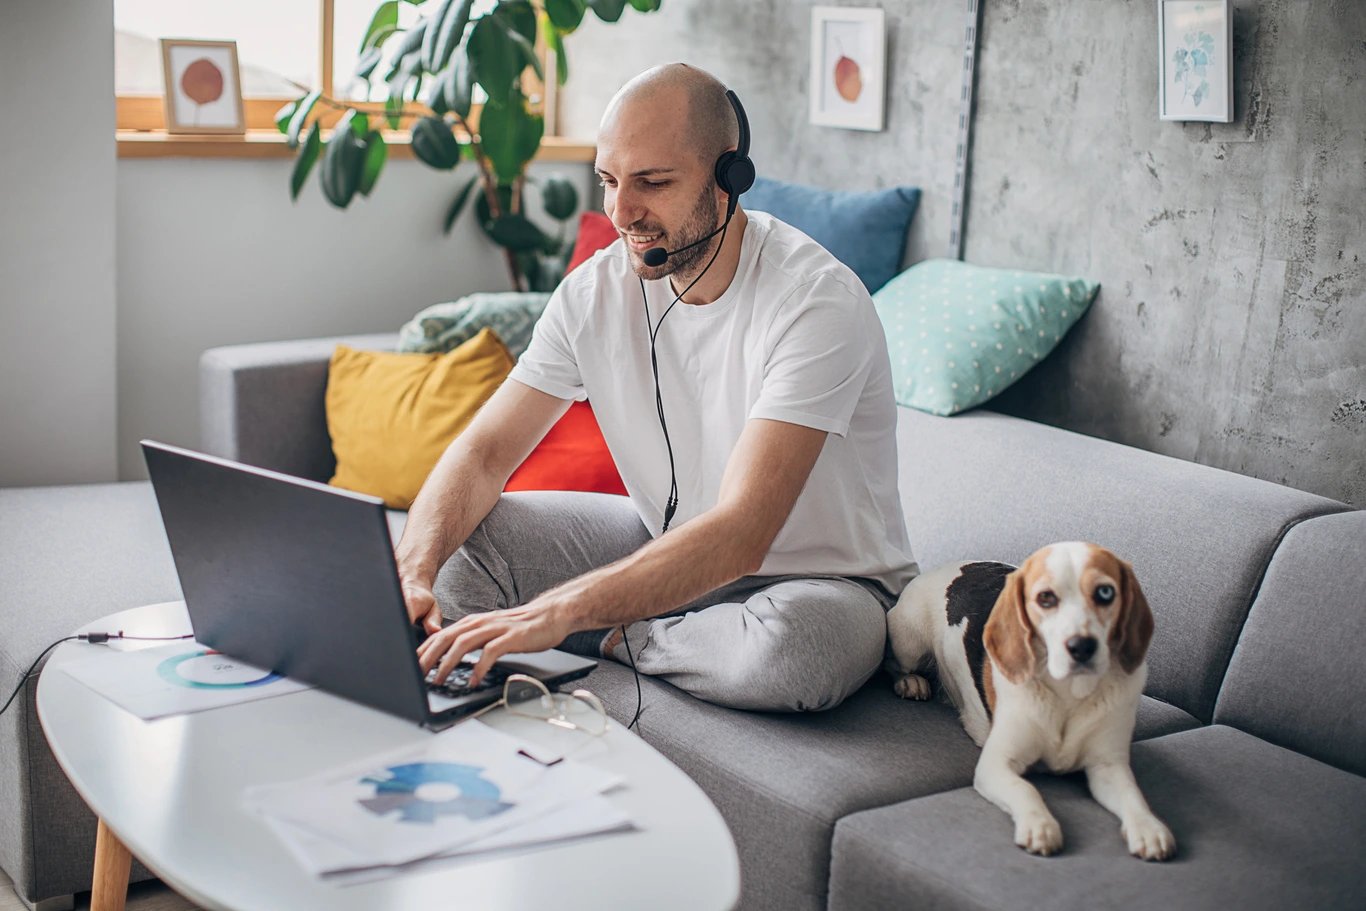 man-on-couch-sitting-at-laptop-on-headset-with-dog